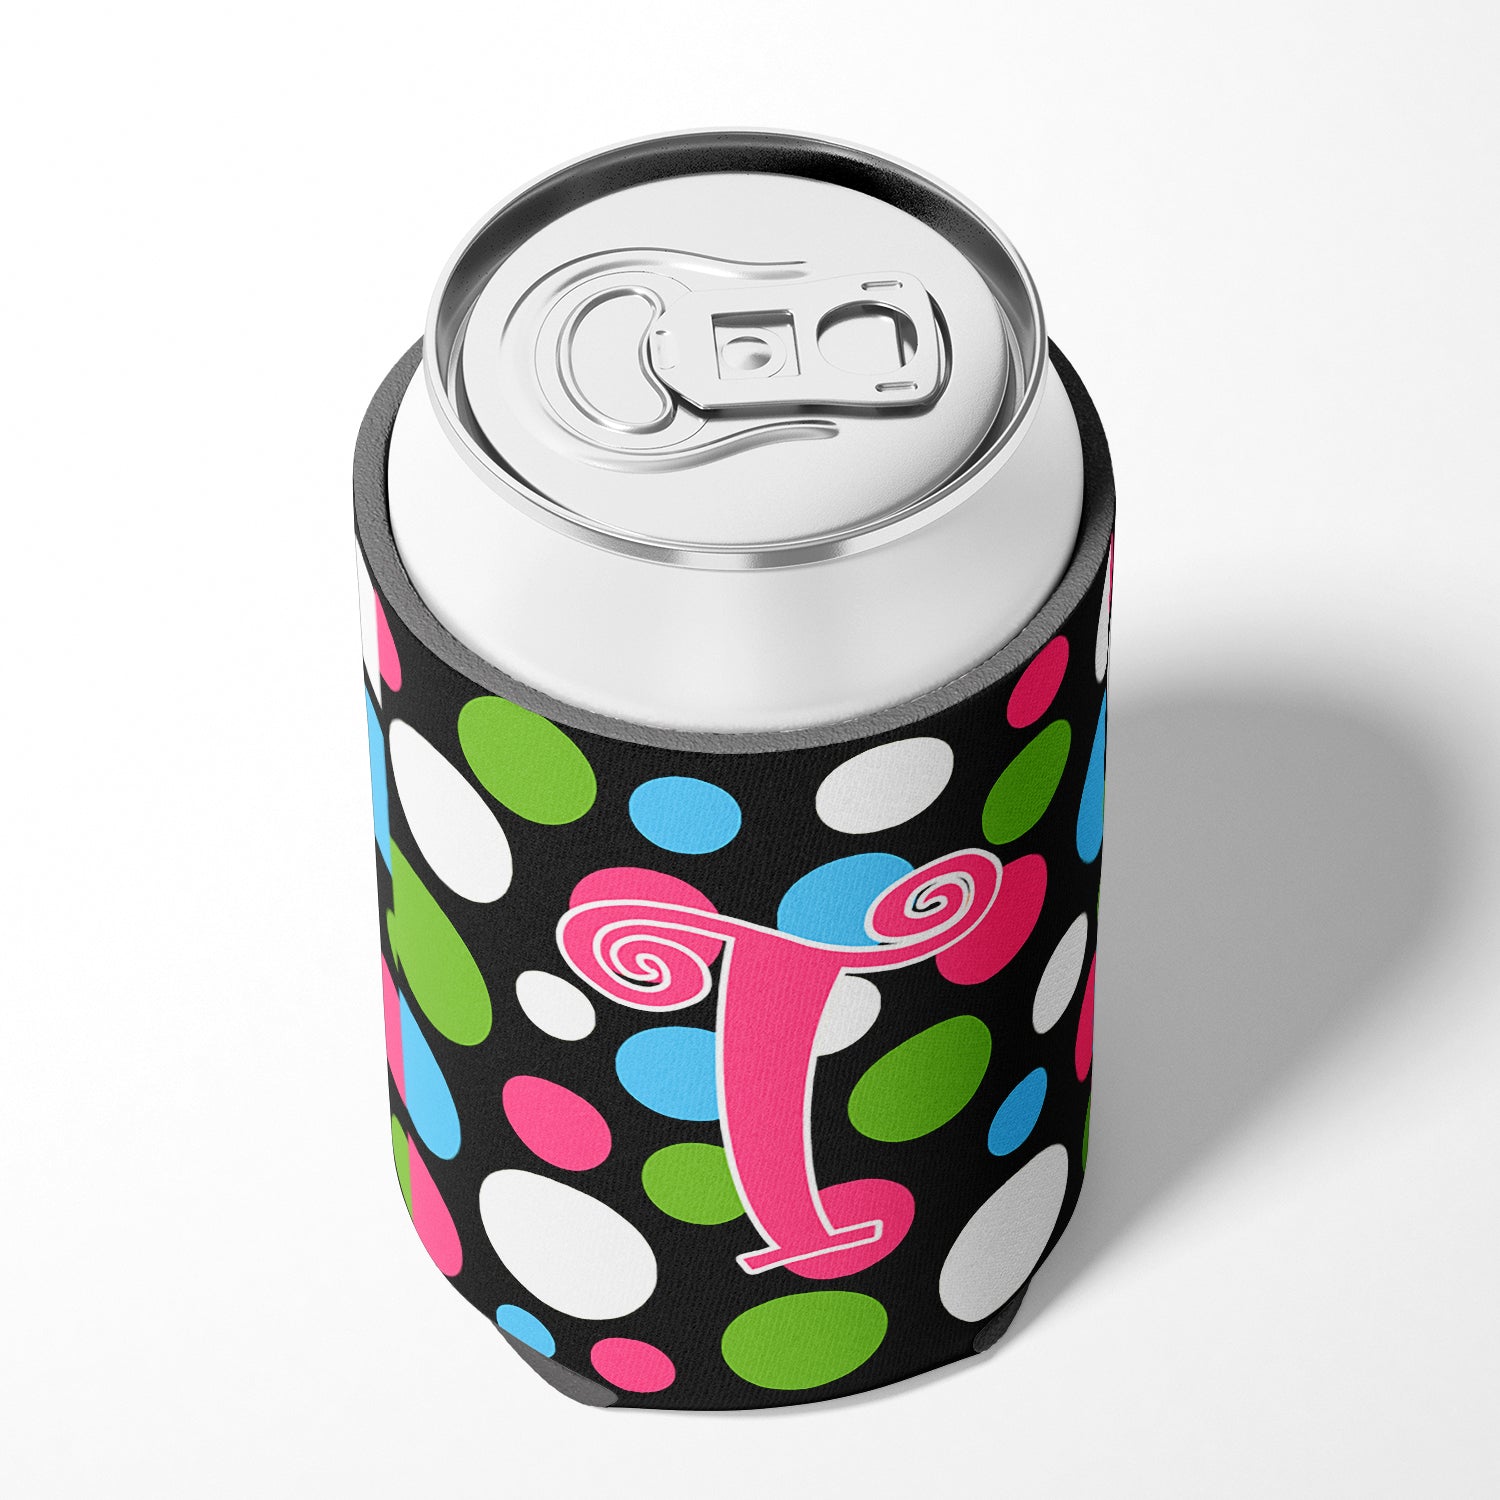 Letter T Initial Monogram - Polkadots and Pink Can or Bottle Beverage Insulator Hugger.